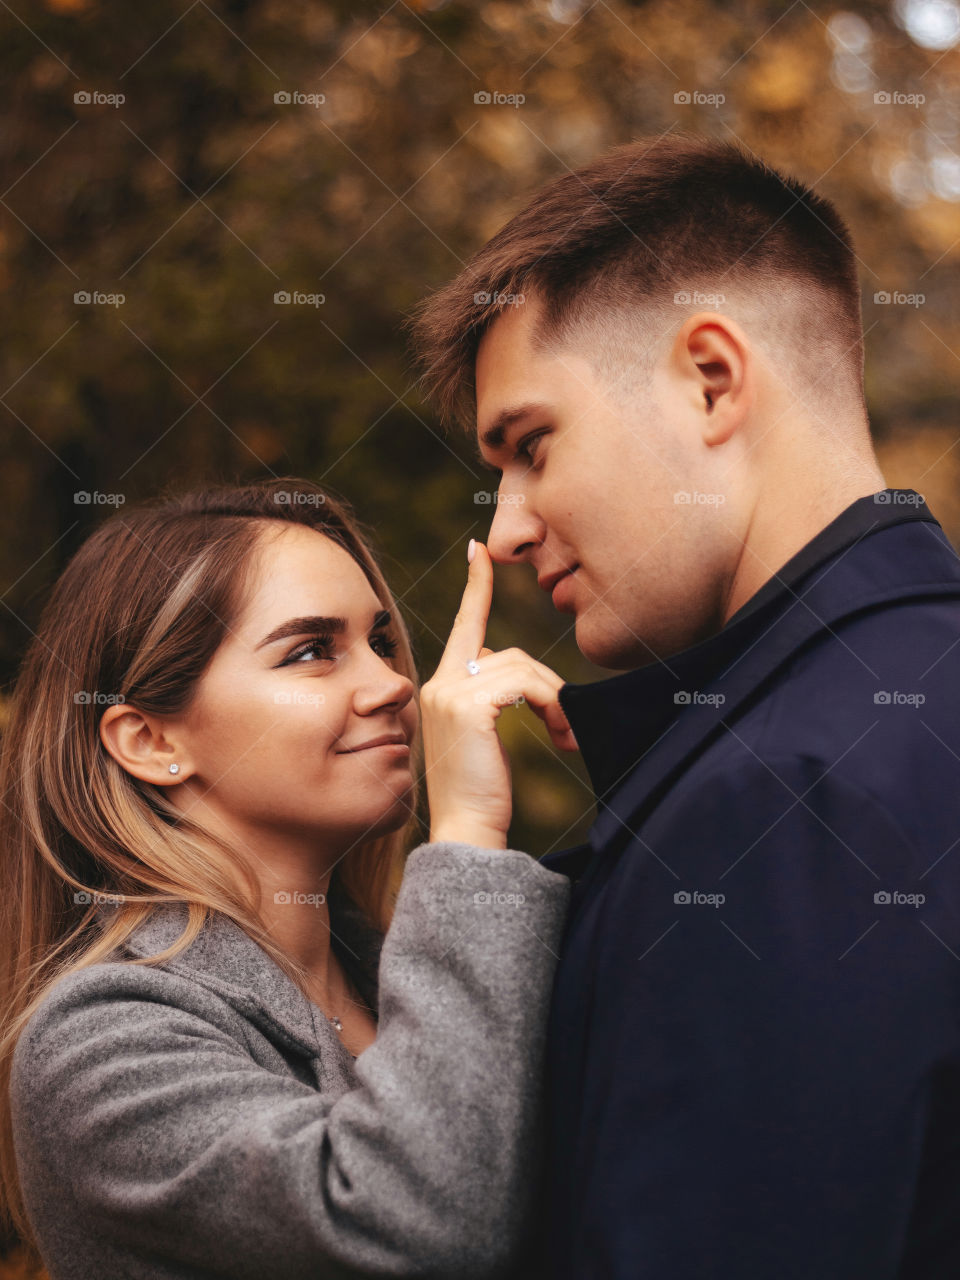 Beautiful couple - smiling girl and her boyfriend, and girl is touching the nose of a boy, autumn love story photoshoot 